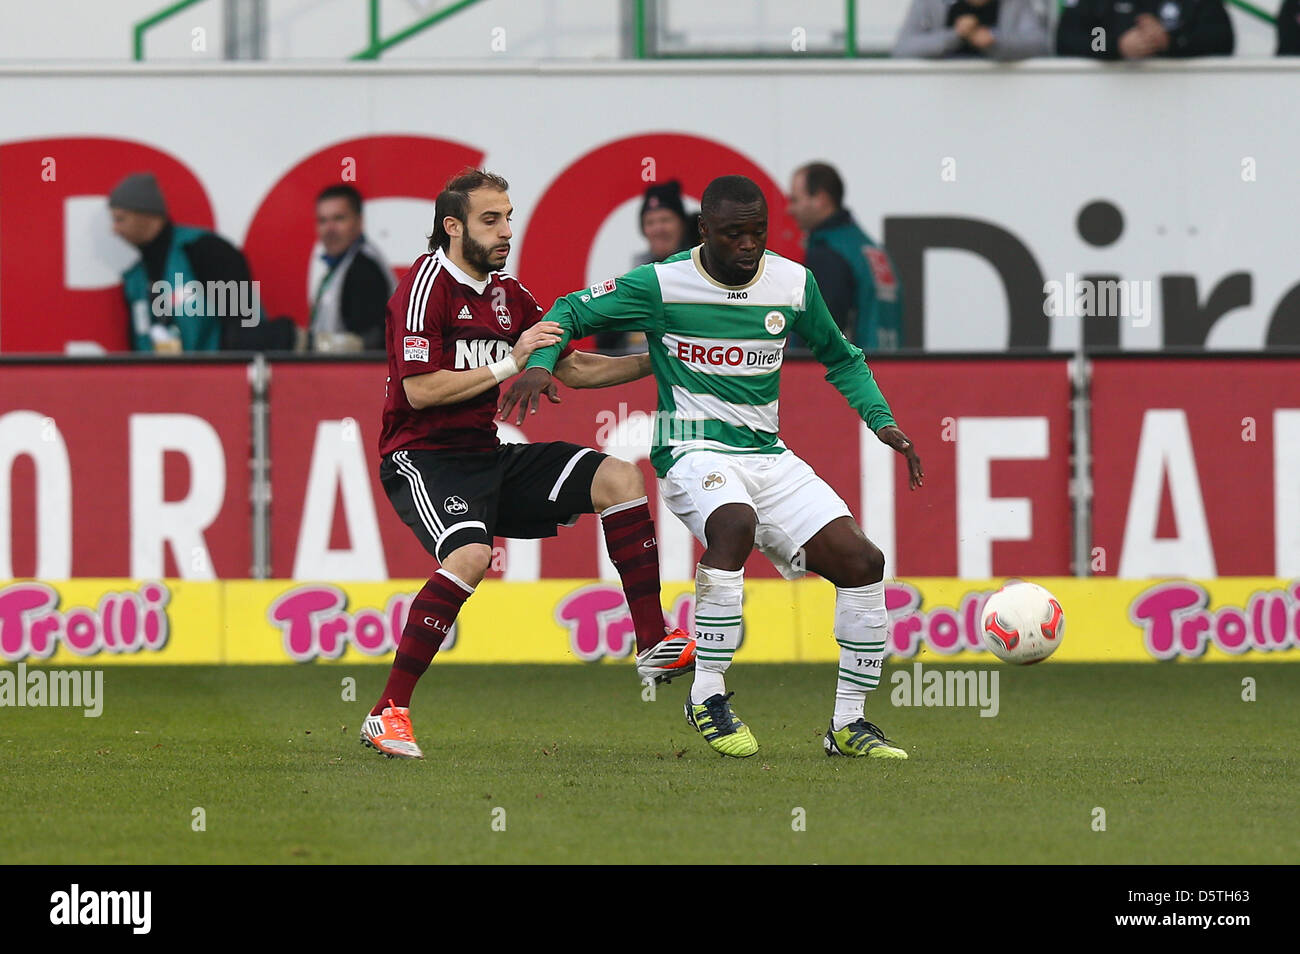 Fuerth's Gerald Asamoah (R) and Nuremberg's Javier Pinola vie for the ball during the German Bundesliga soccer match SpVgg Greuther Fuerth vs 1. FC Nuremberg at Trolli Arena in Fuerth, Germany, 24 November 2012. The match ended 0:0. Photo: Revierfoto Stock Photo